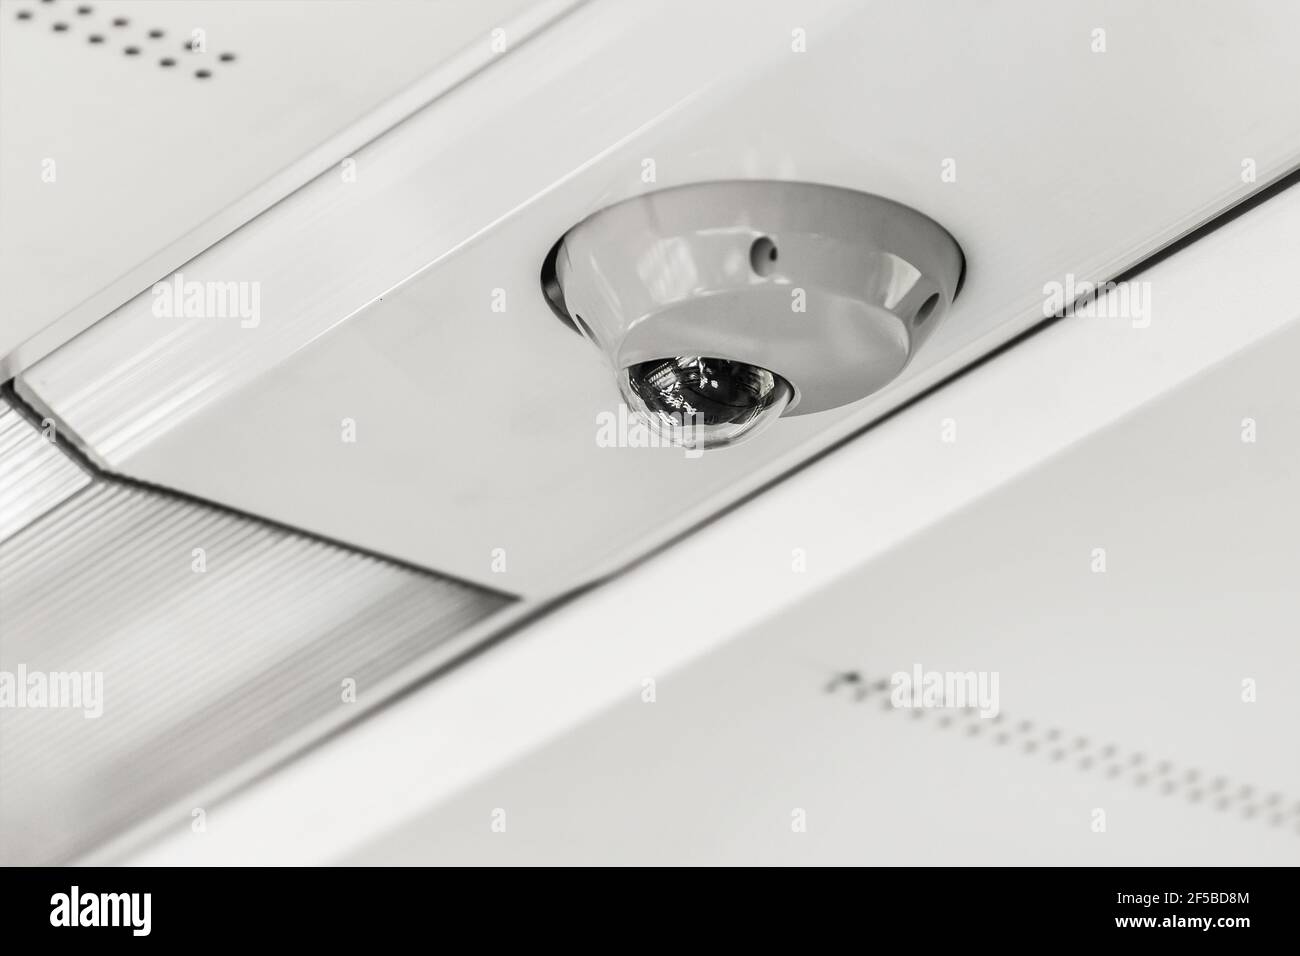 Surveillance camera on the white ceiling background of a modern electric train stadler, close up. Stock Photo